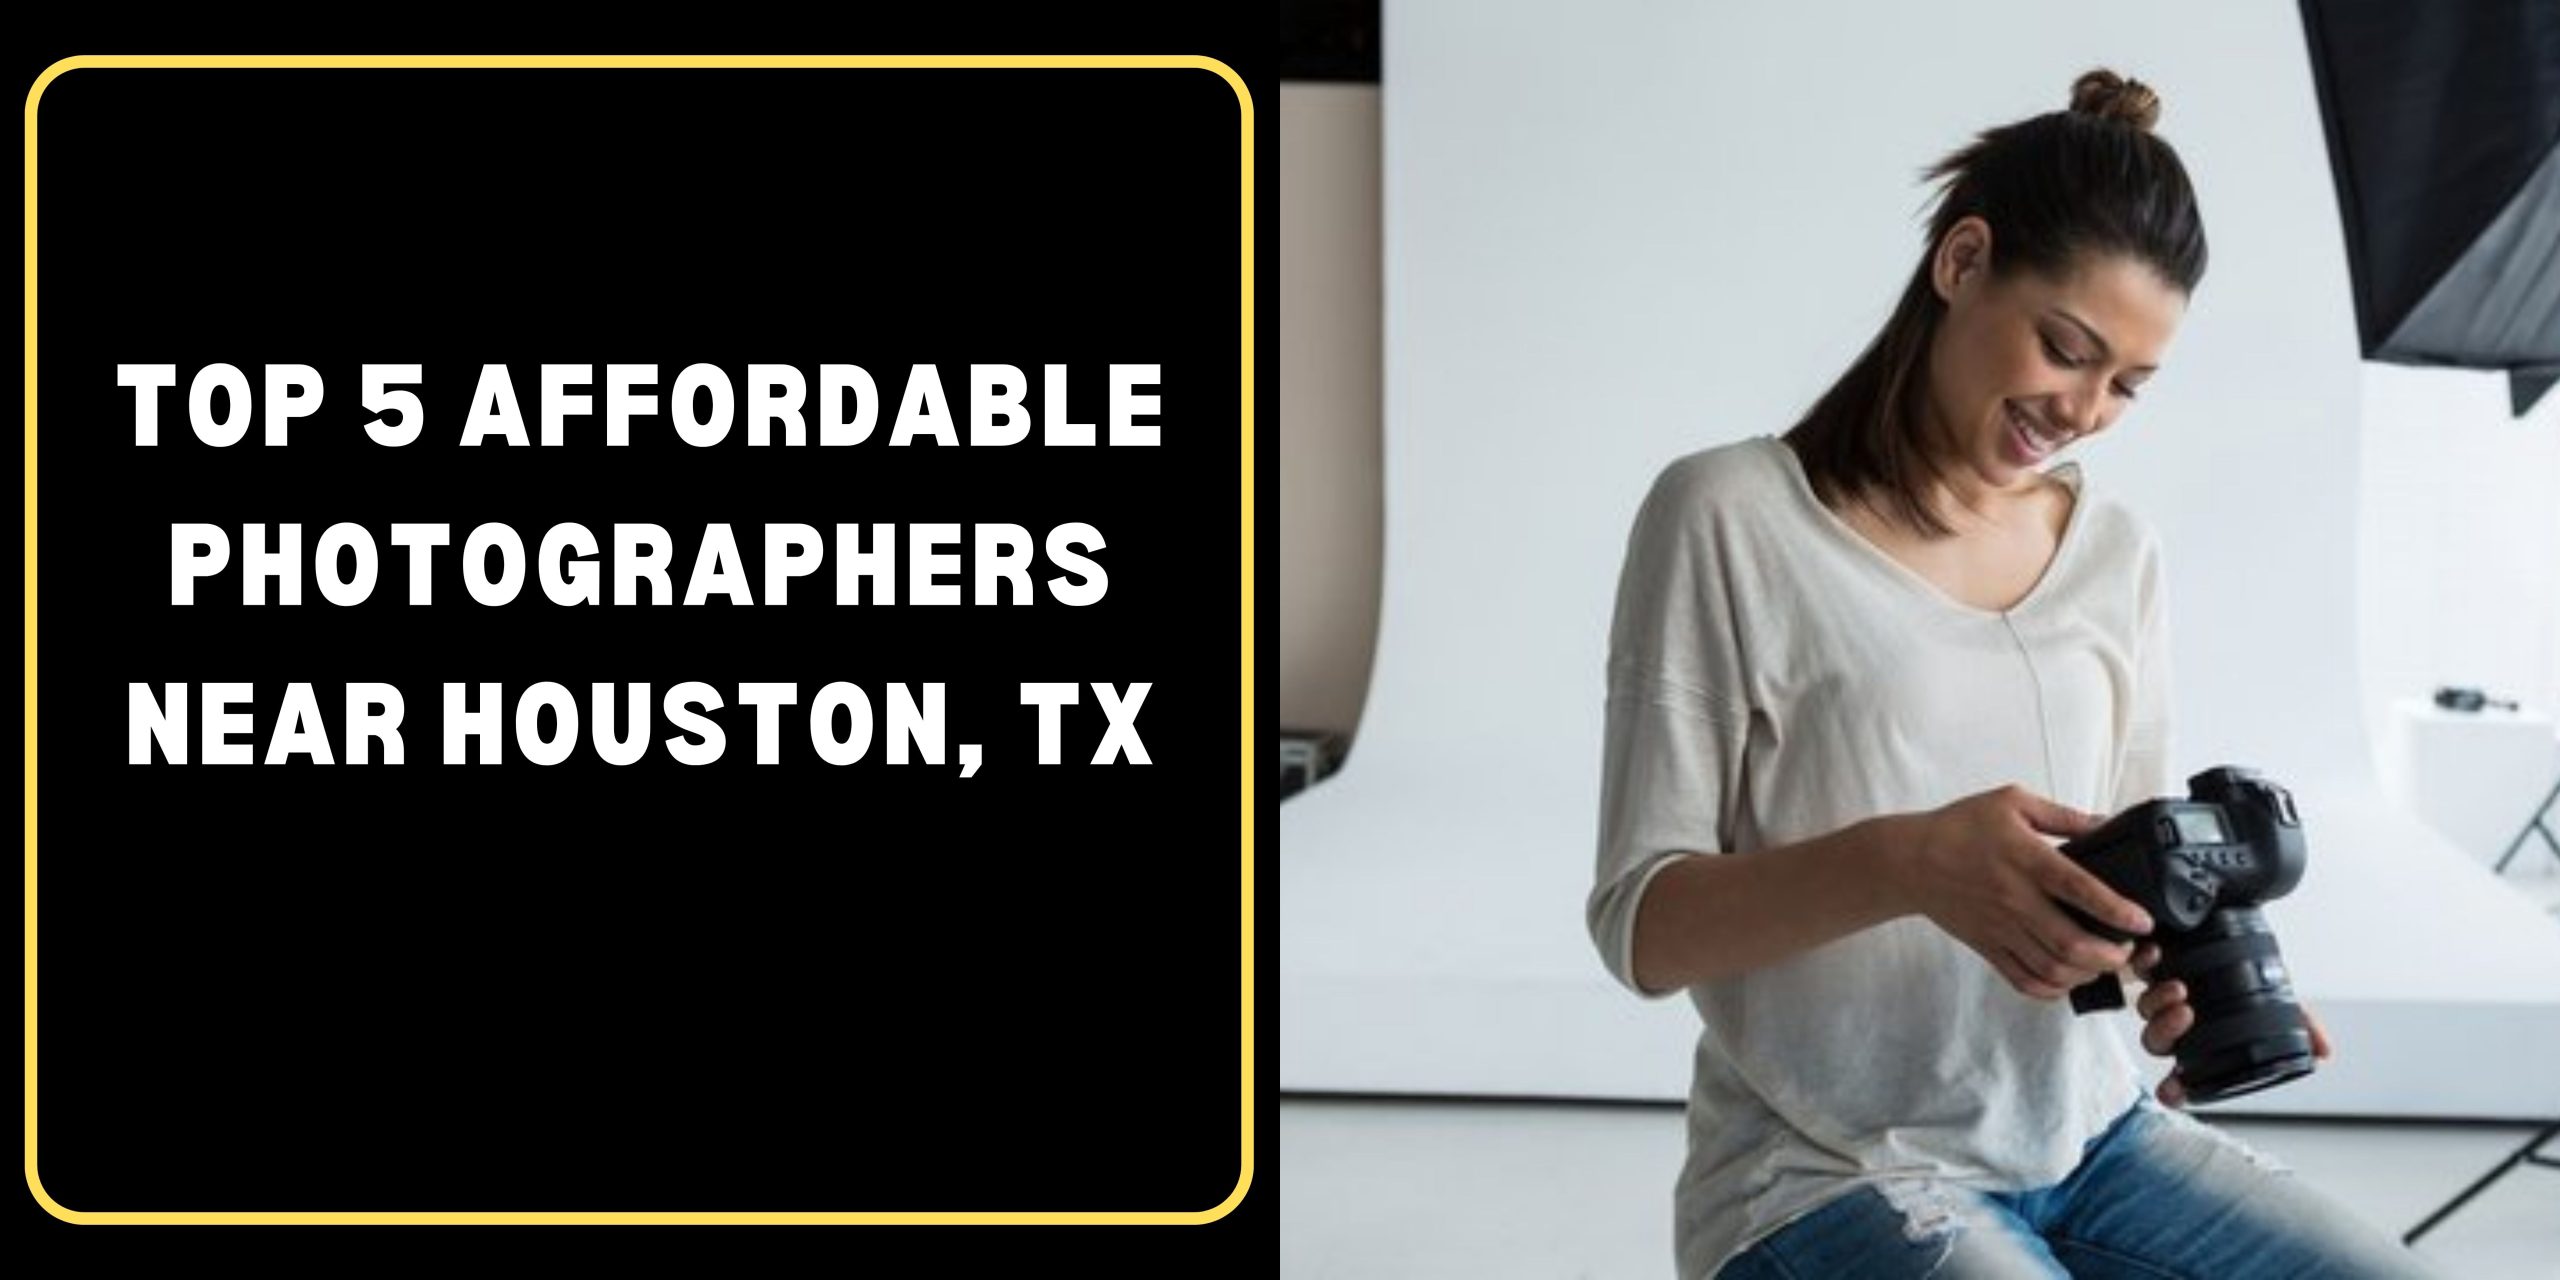 Top 5 Affordable Photographers near Houston TX